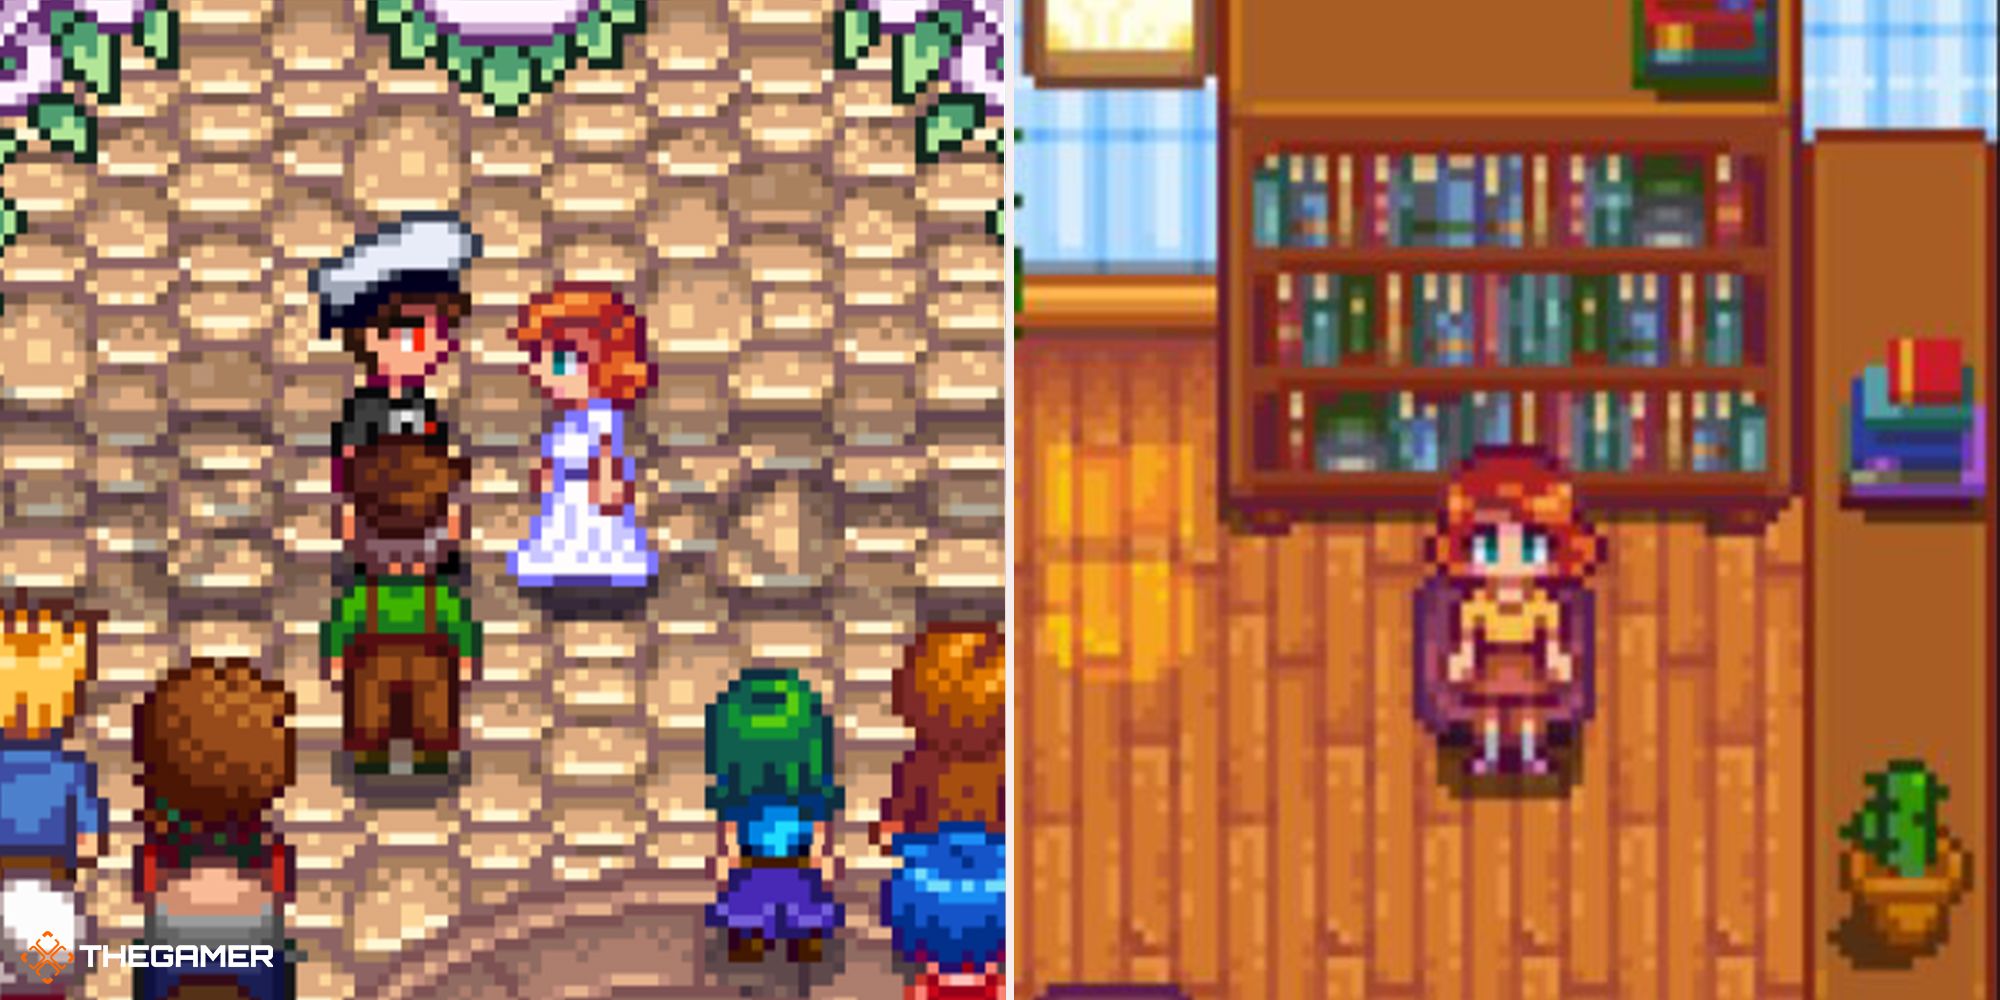 Stardew Valley - Penny wedding (left), unique spouse room (right)